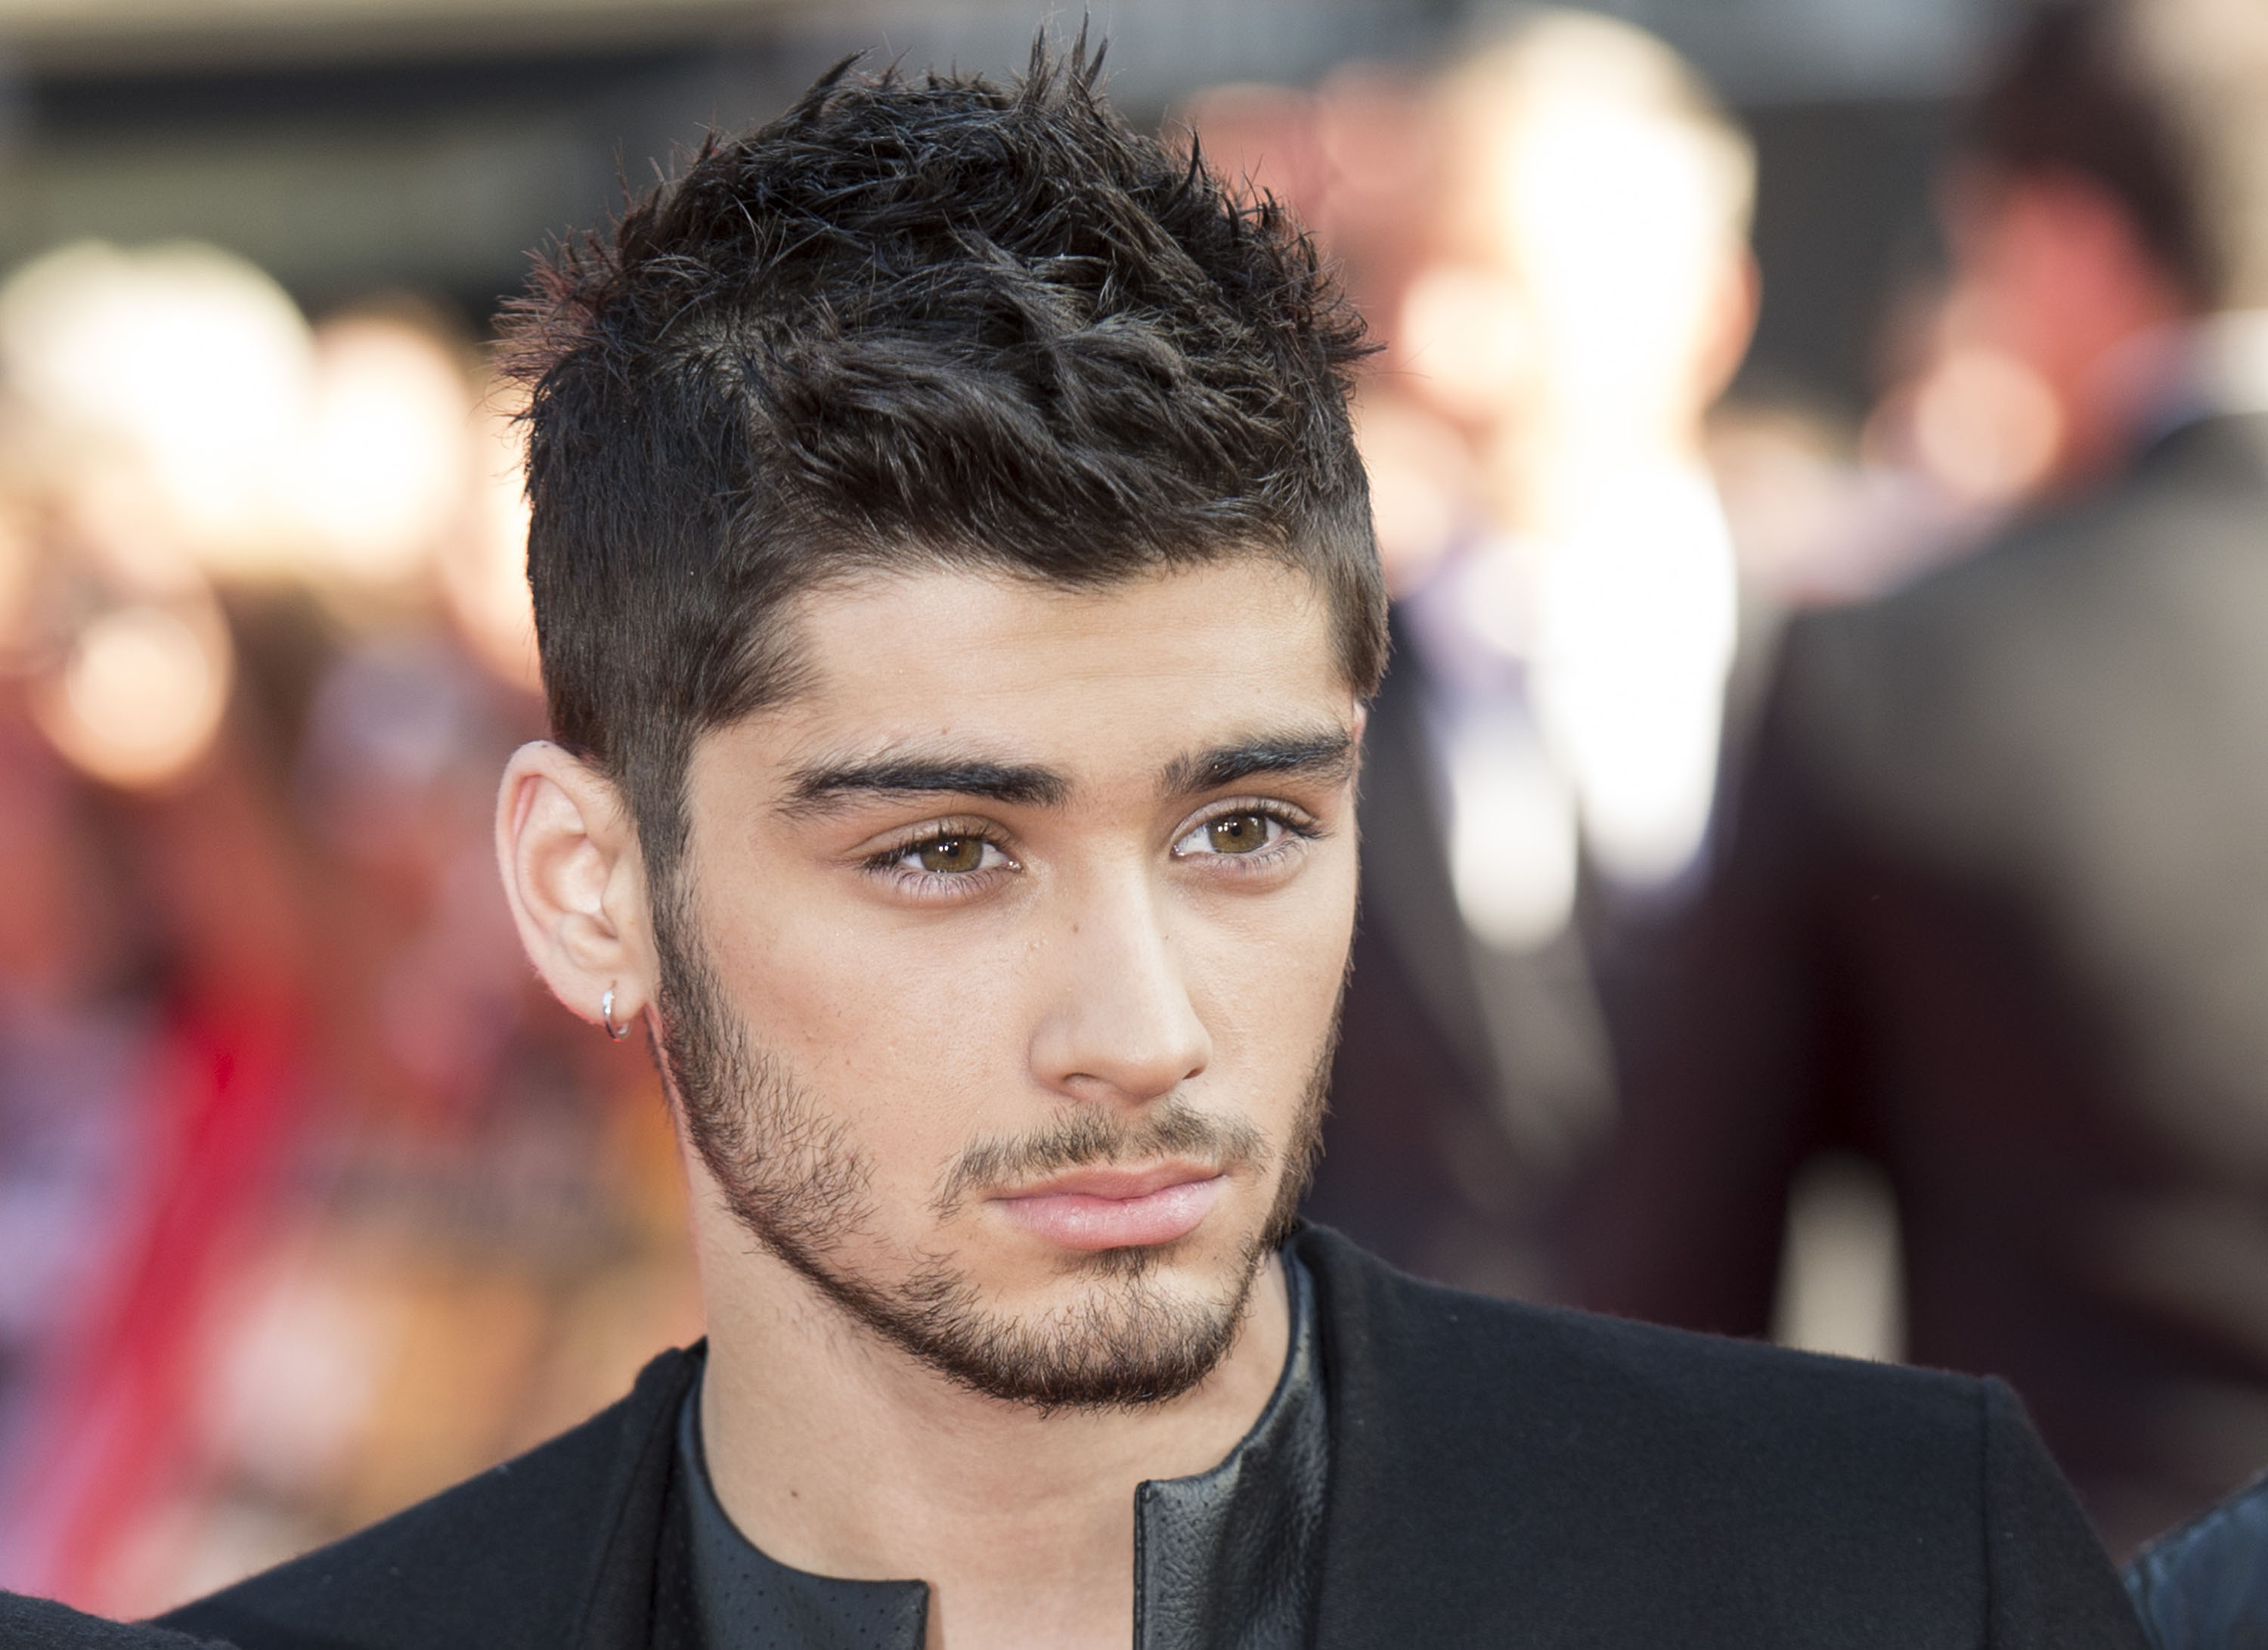 Wasn't convinced with what One Direction was selling: Zayn Malik